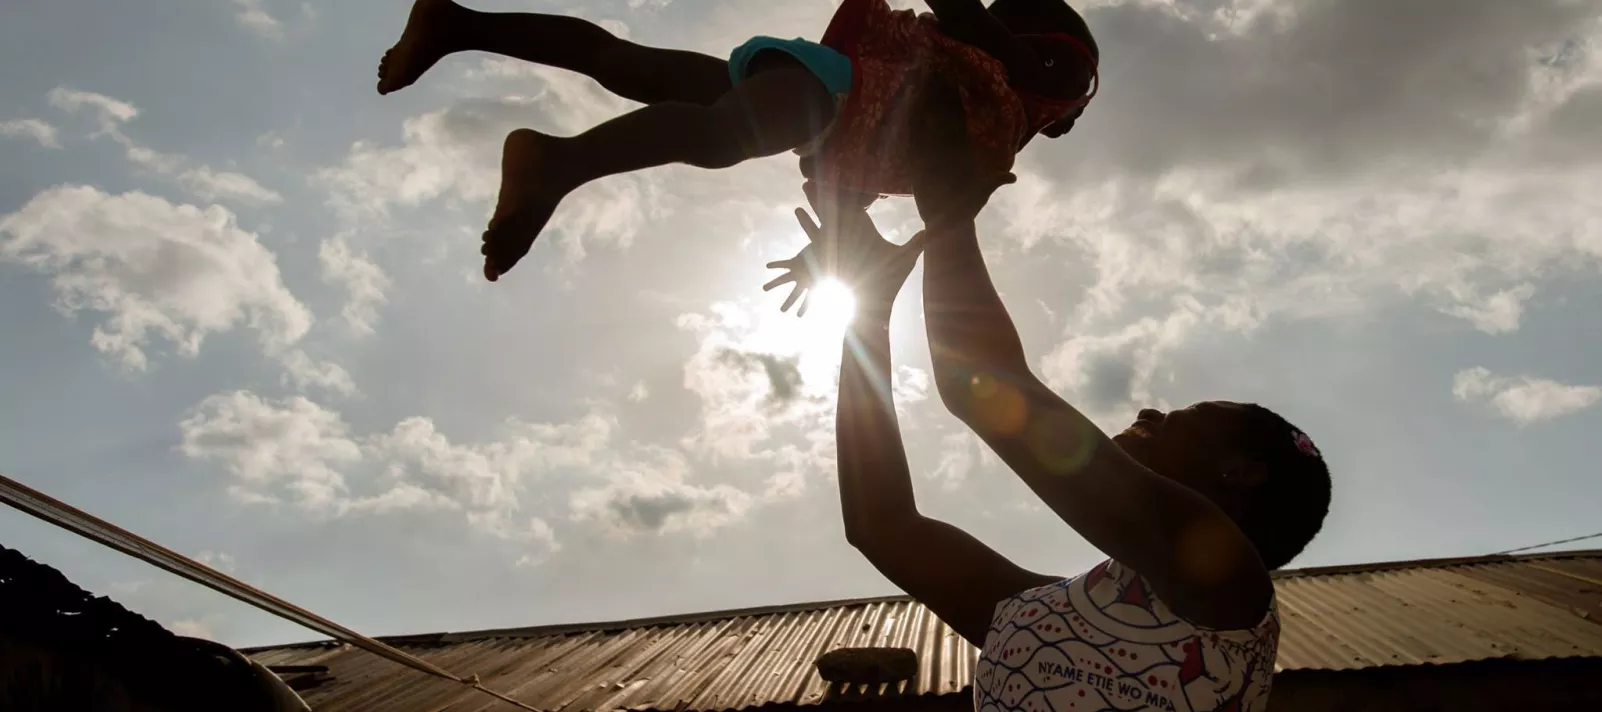 A mother and child playing, photographed against the sky